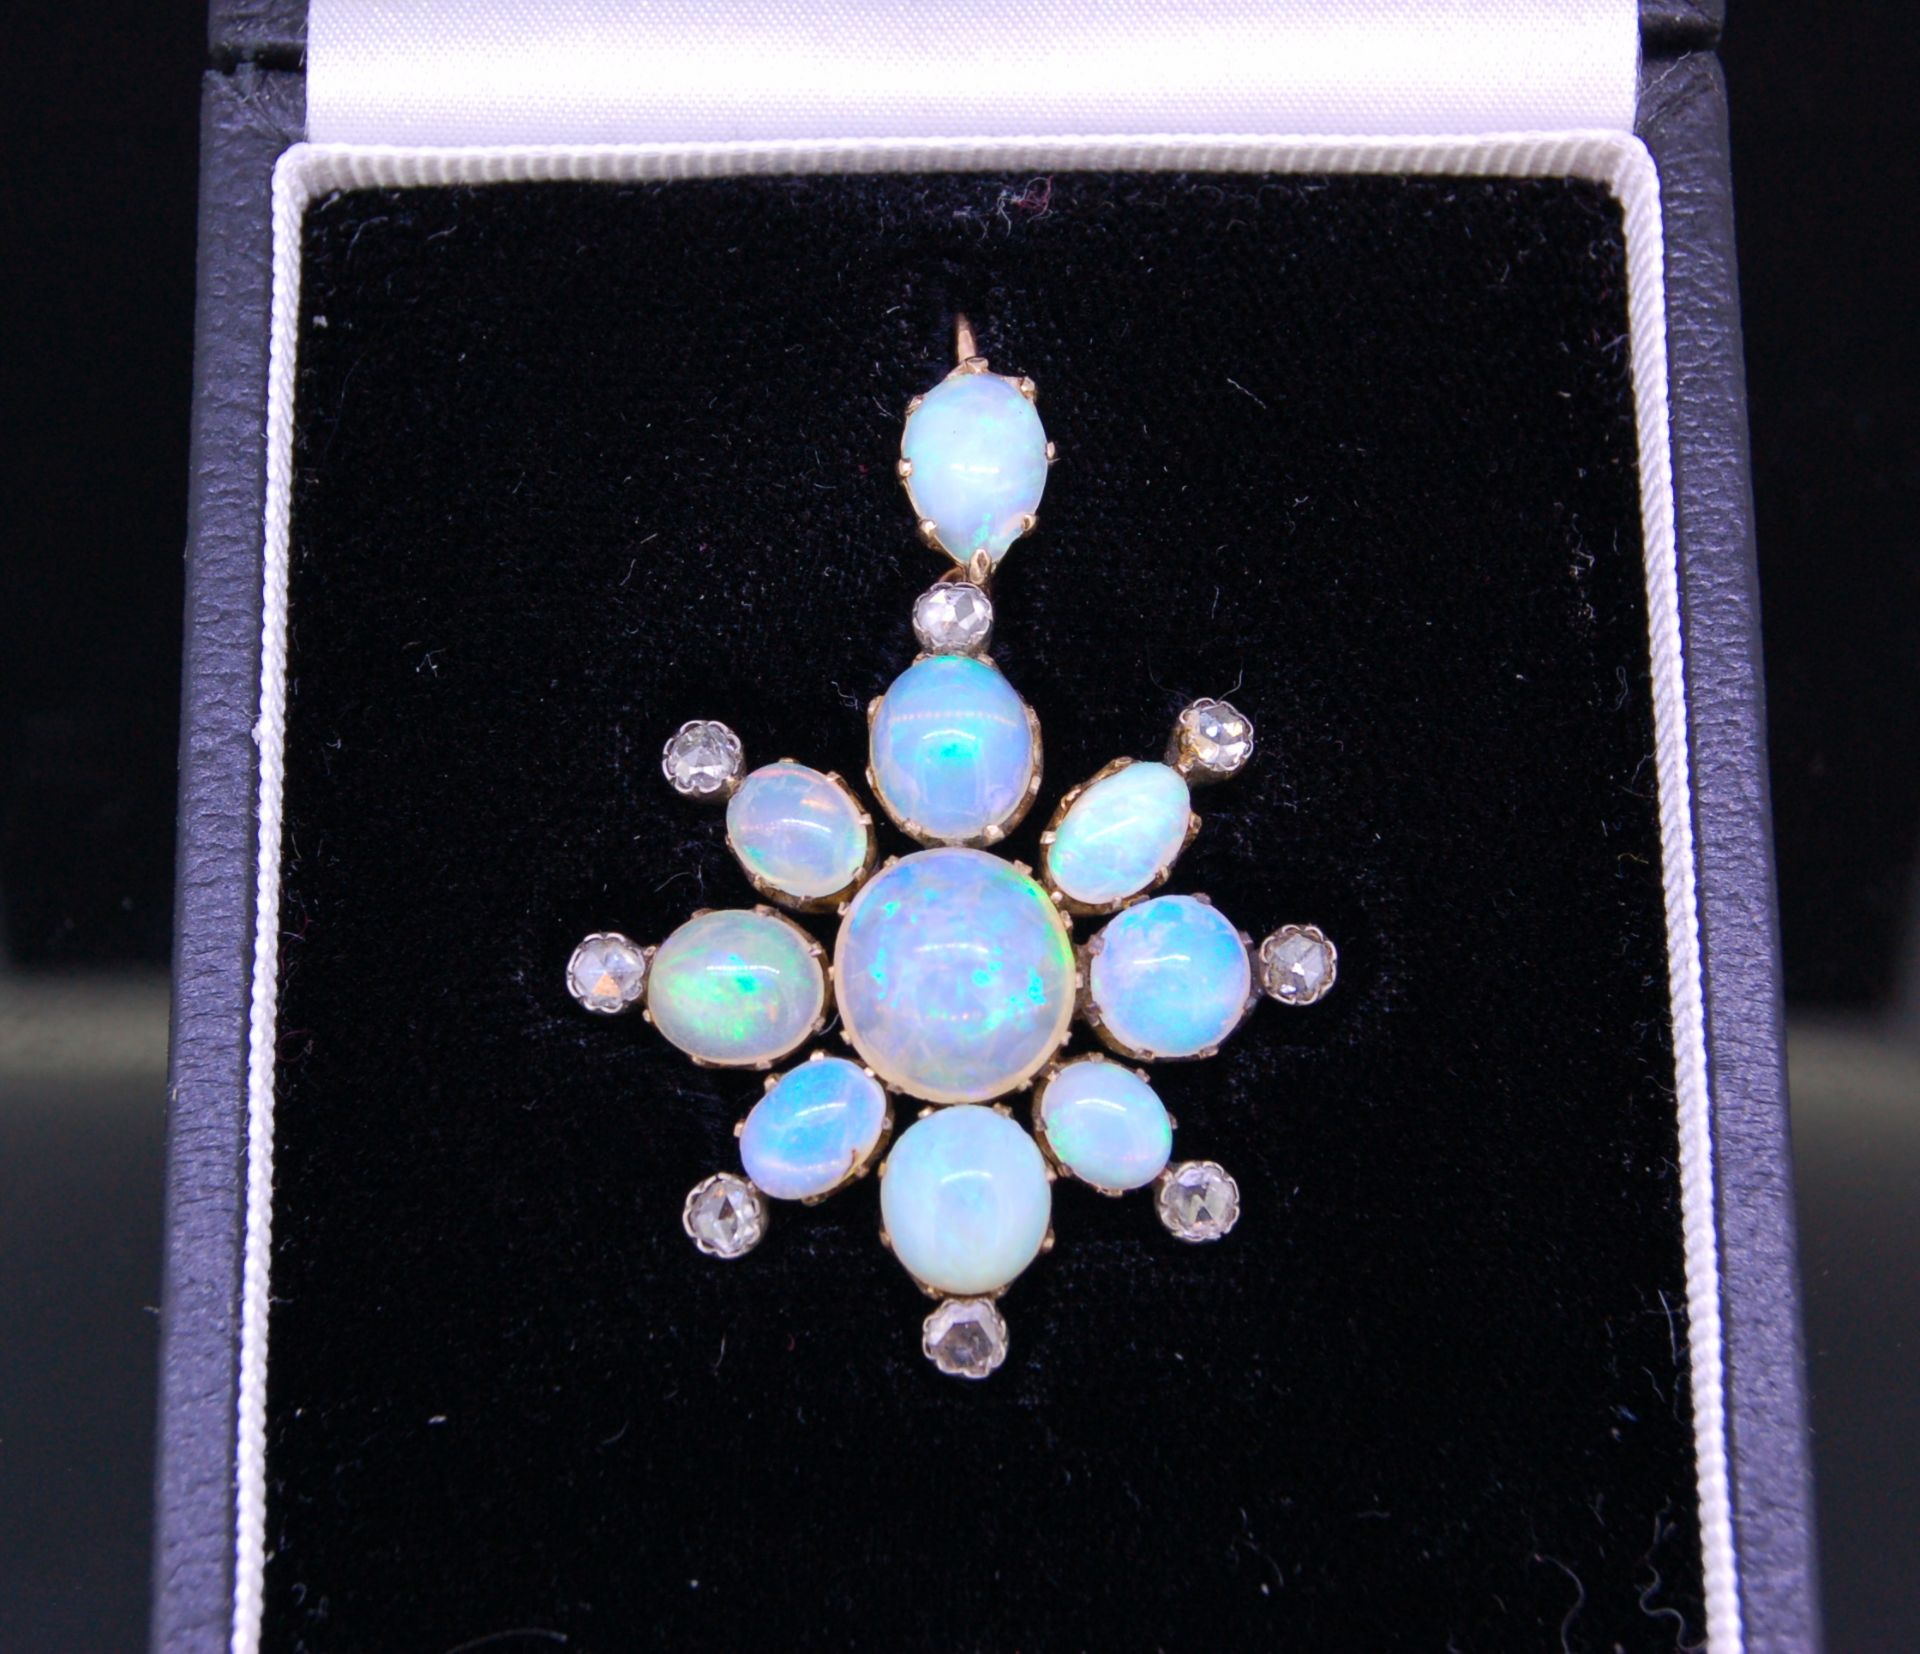 ANTIQUE OPAL AND DIAMOND PENDANT - Image 3 of 3